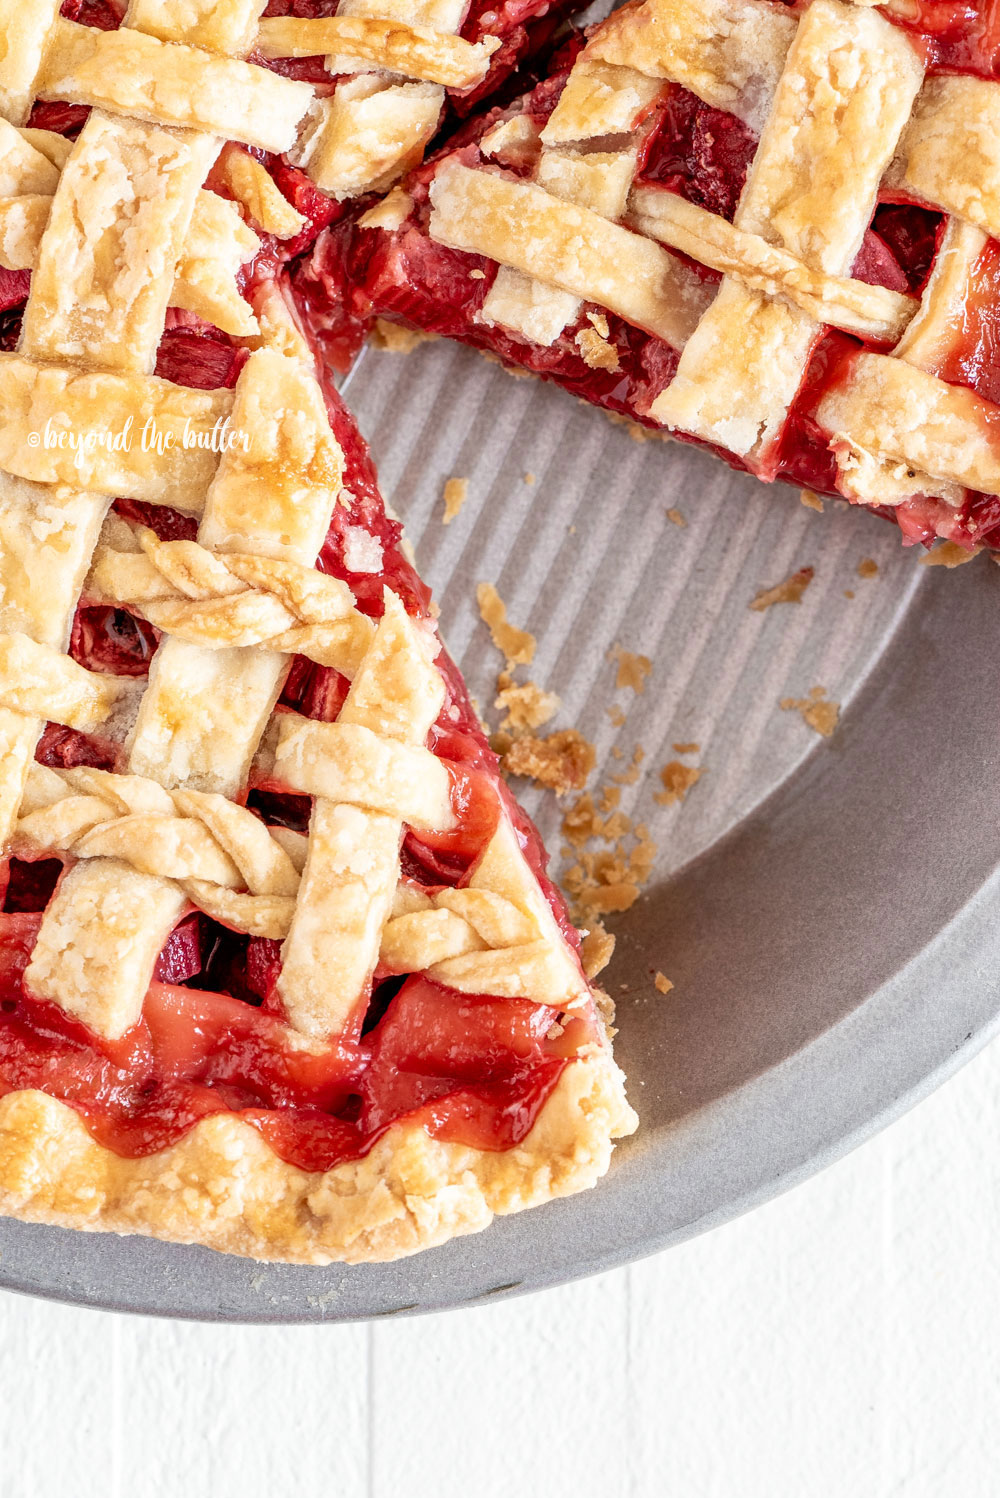 Strawberry Rhubarb Pie | All Images © Beyond the Butter, LLC